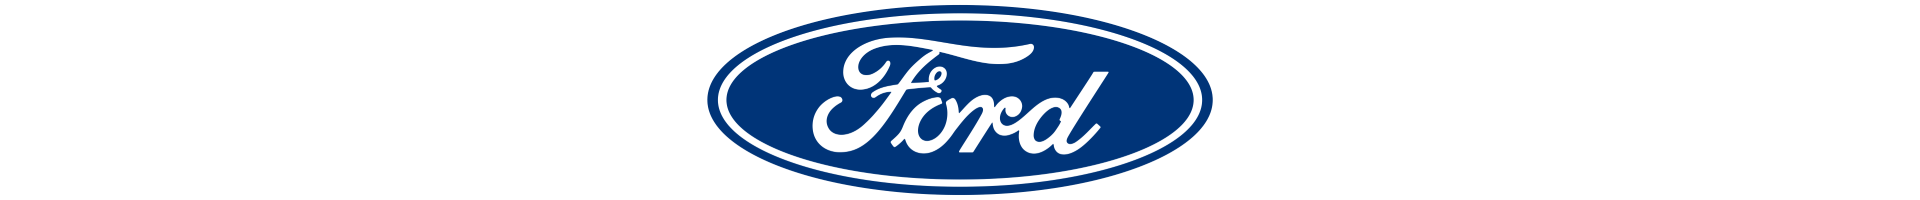 California Lemon Law Attorney - Ford owners